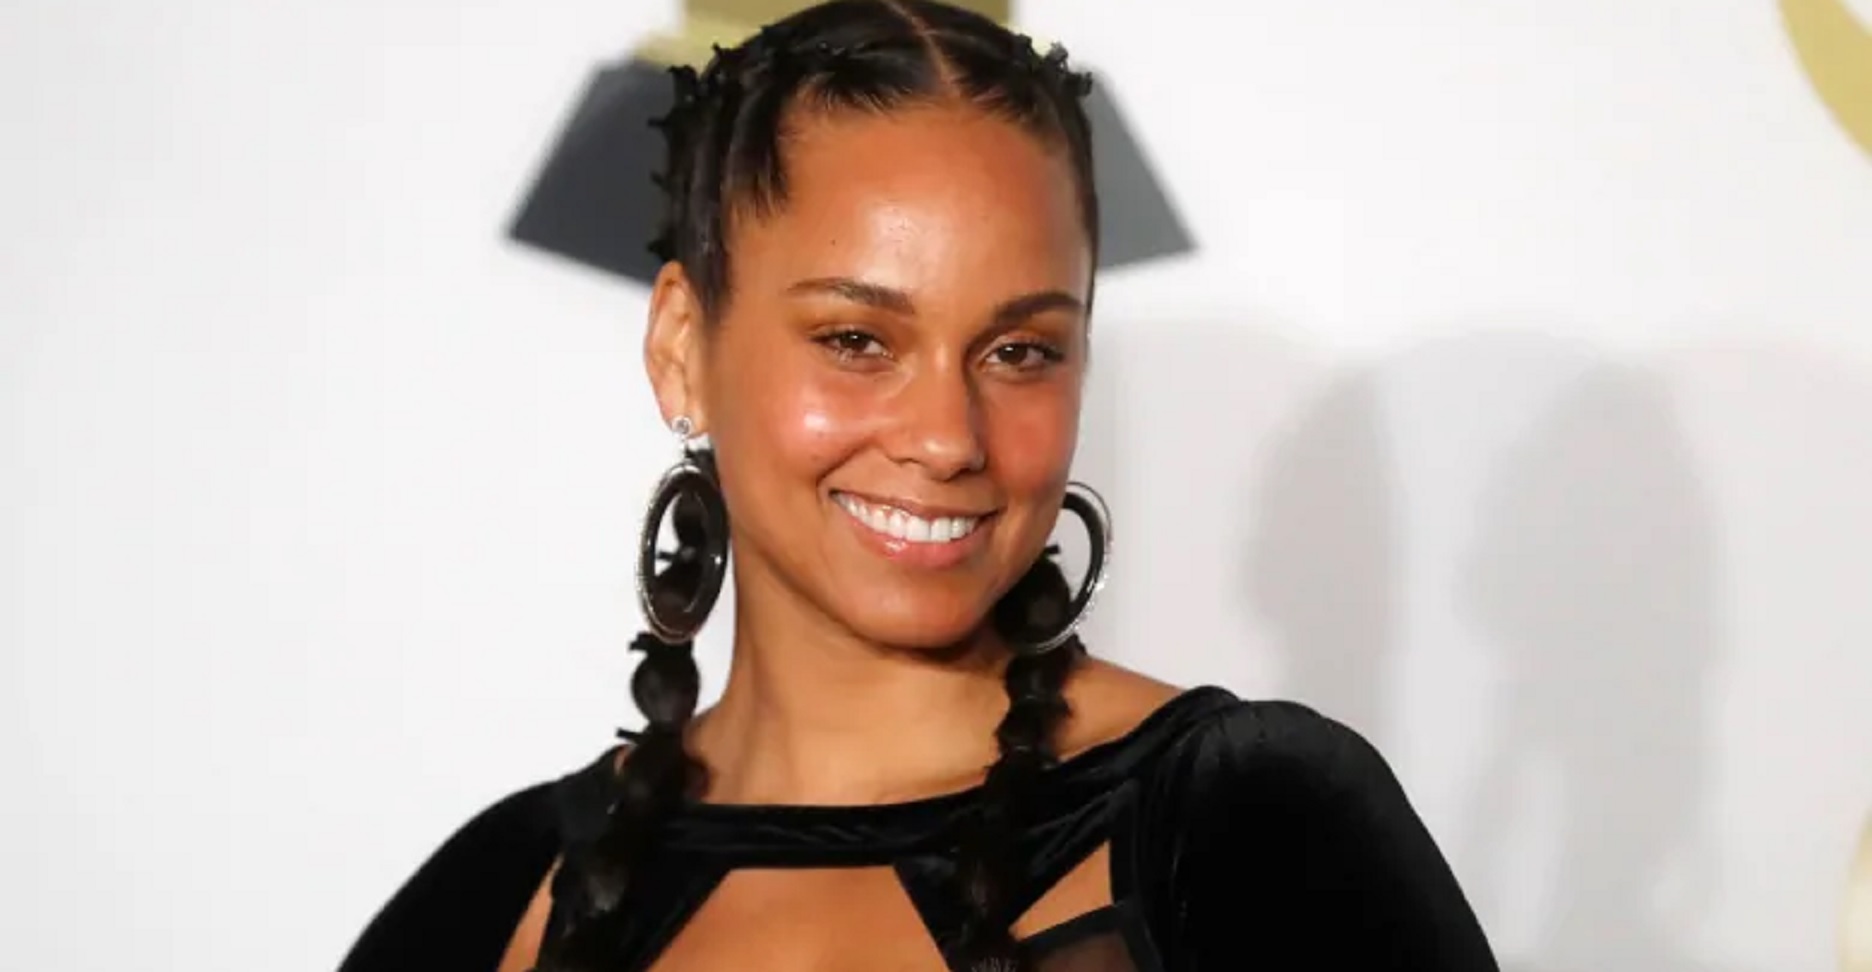 Alicia Keys To Be Honored at Billboard’s Women in Music 2019 Event!